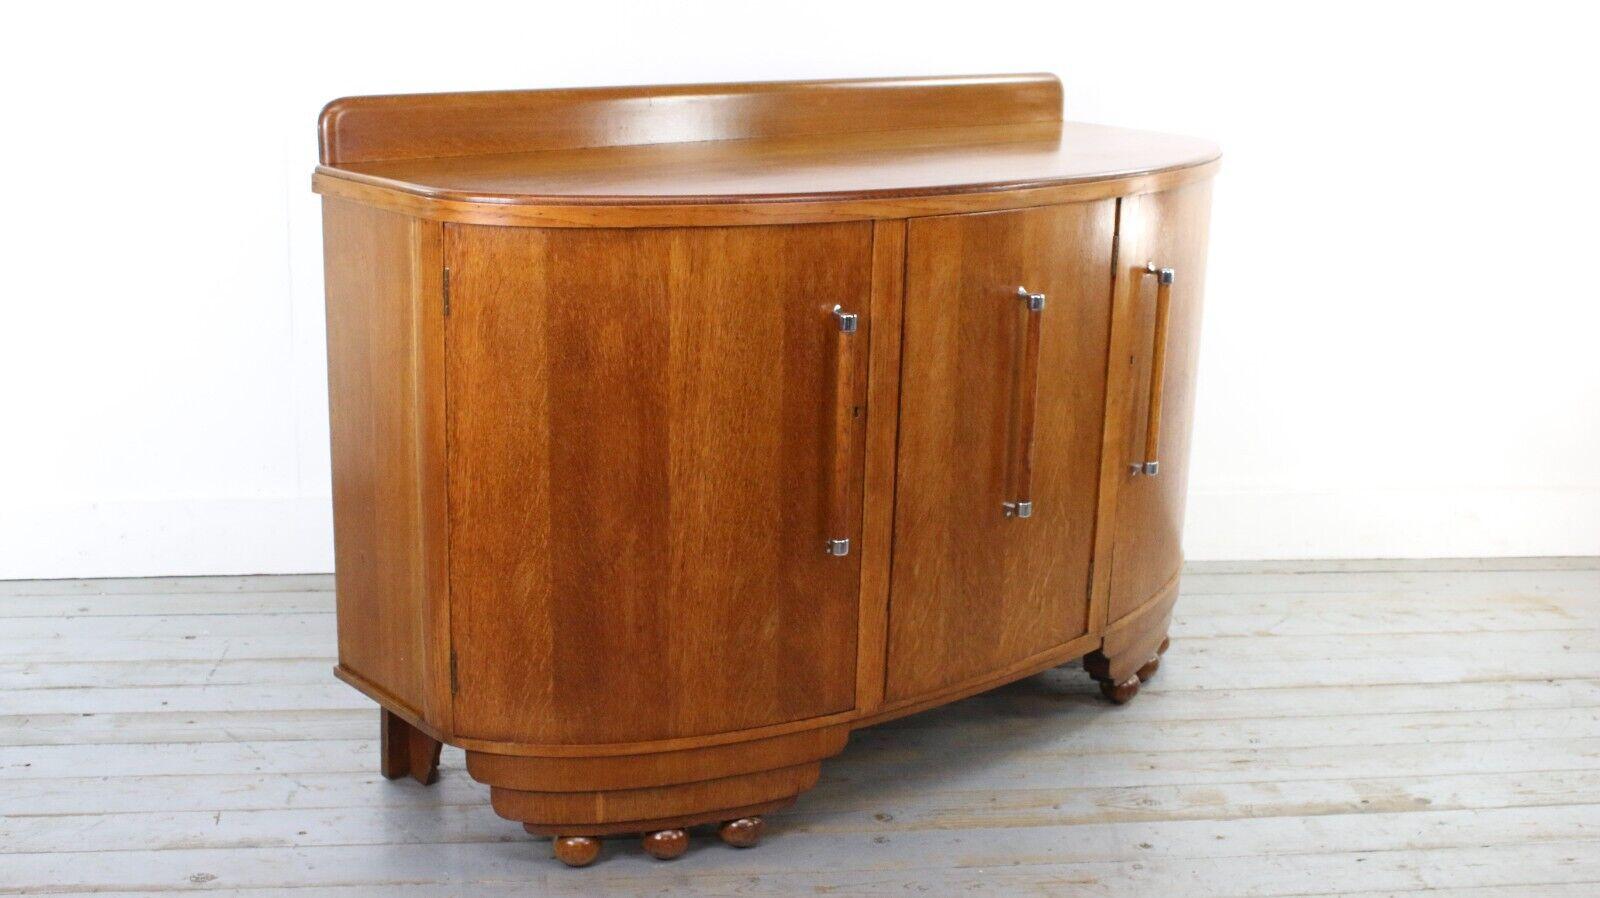 A scarce early g plan cocktail cabinet/sideboard stamped with an early 1930s E Gomme (G Plan) label. Made in the UK in a typical 30s style that is reminiscent of the era.

We have found little about this model and have never seen one before. A